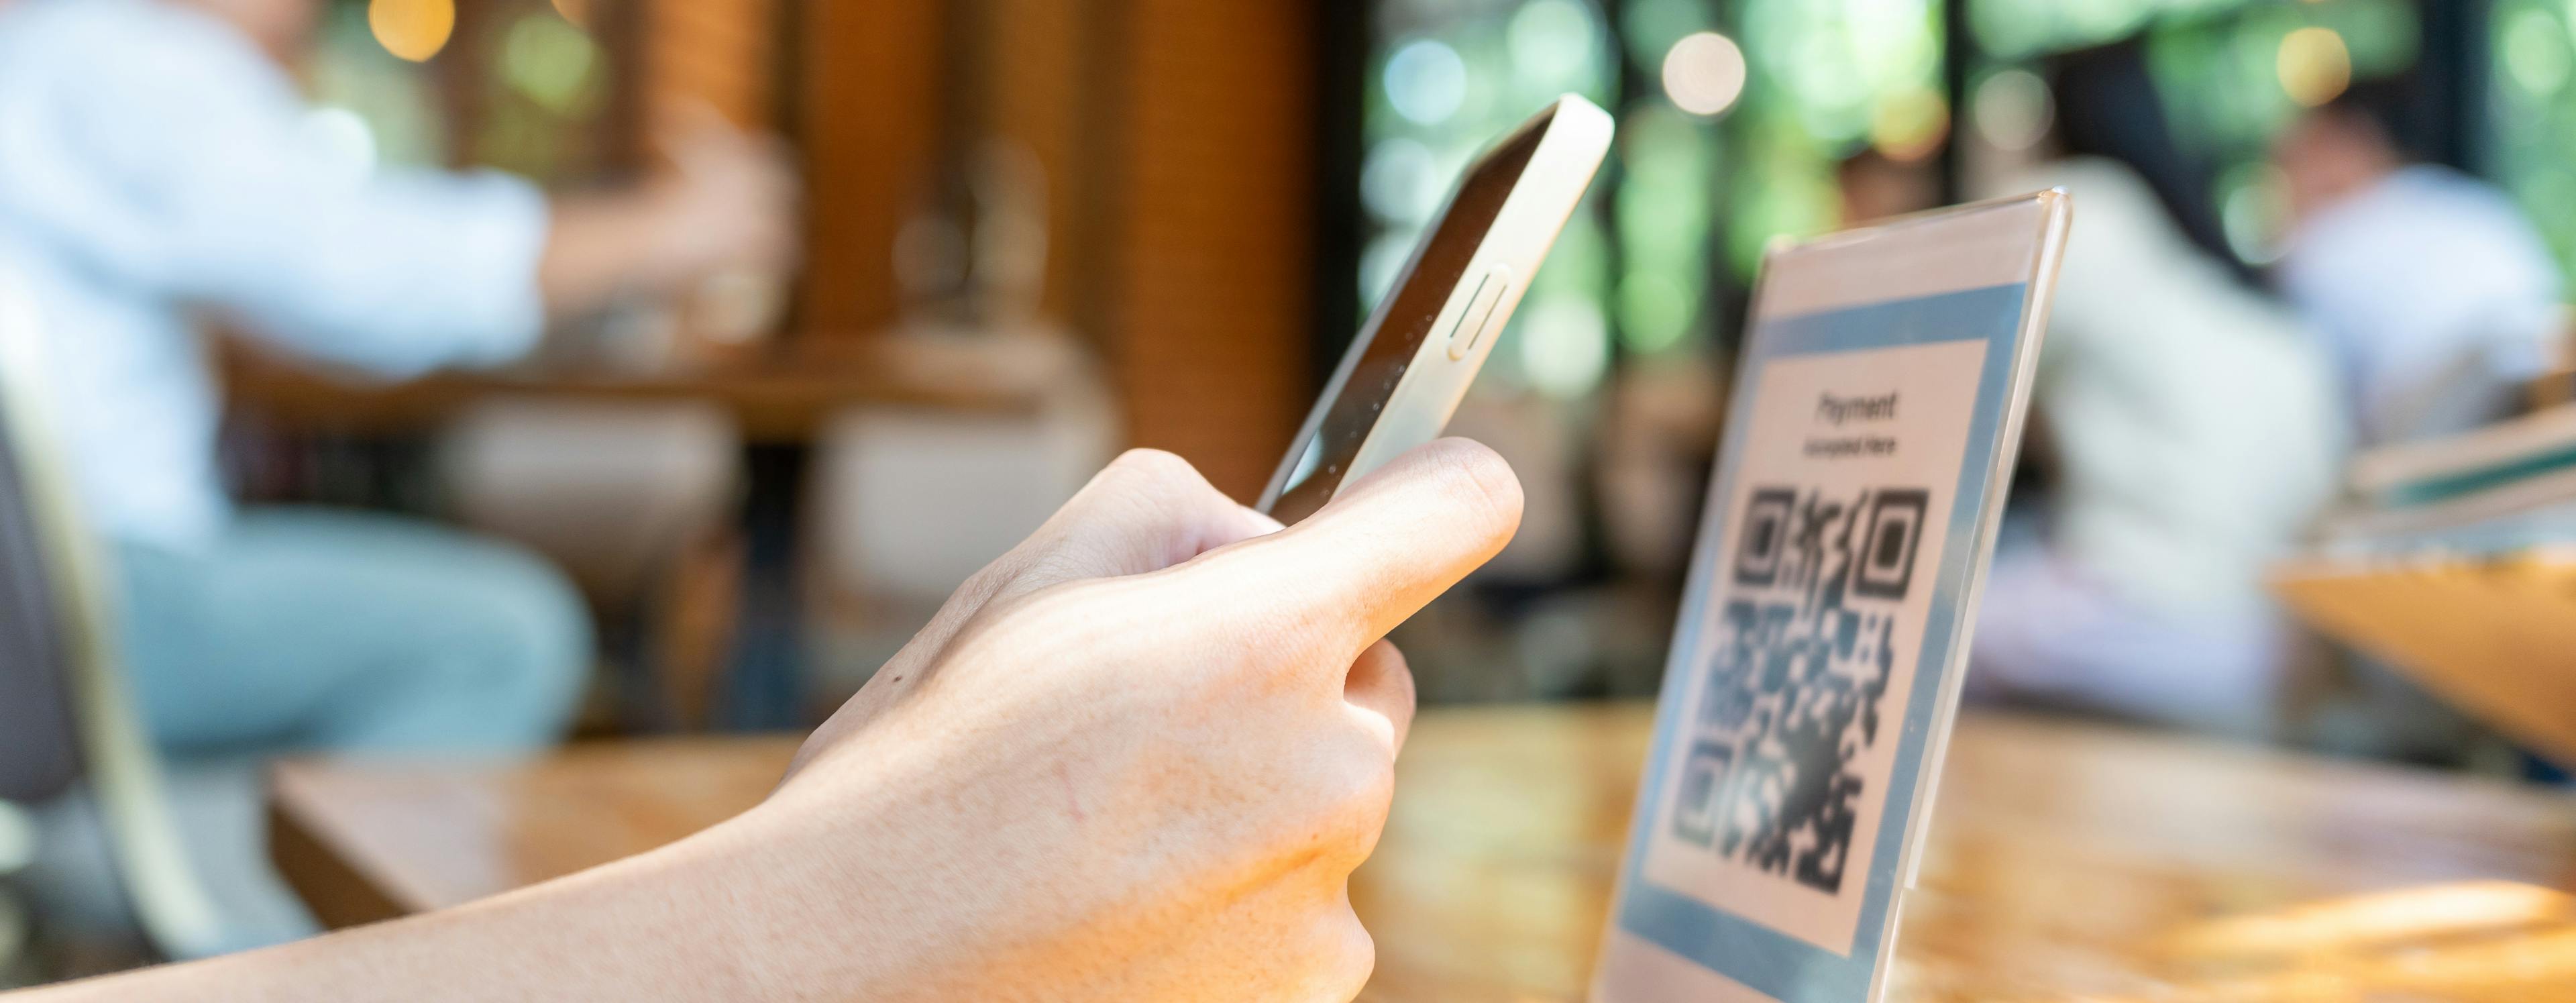 featured image - Make Sure Your QR Code Works: A Detailed QR Code Test Guide